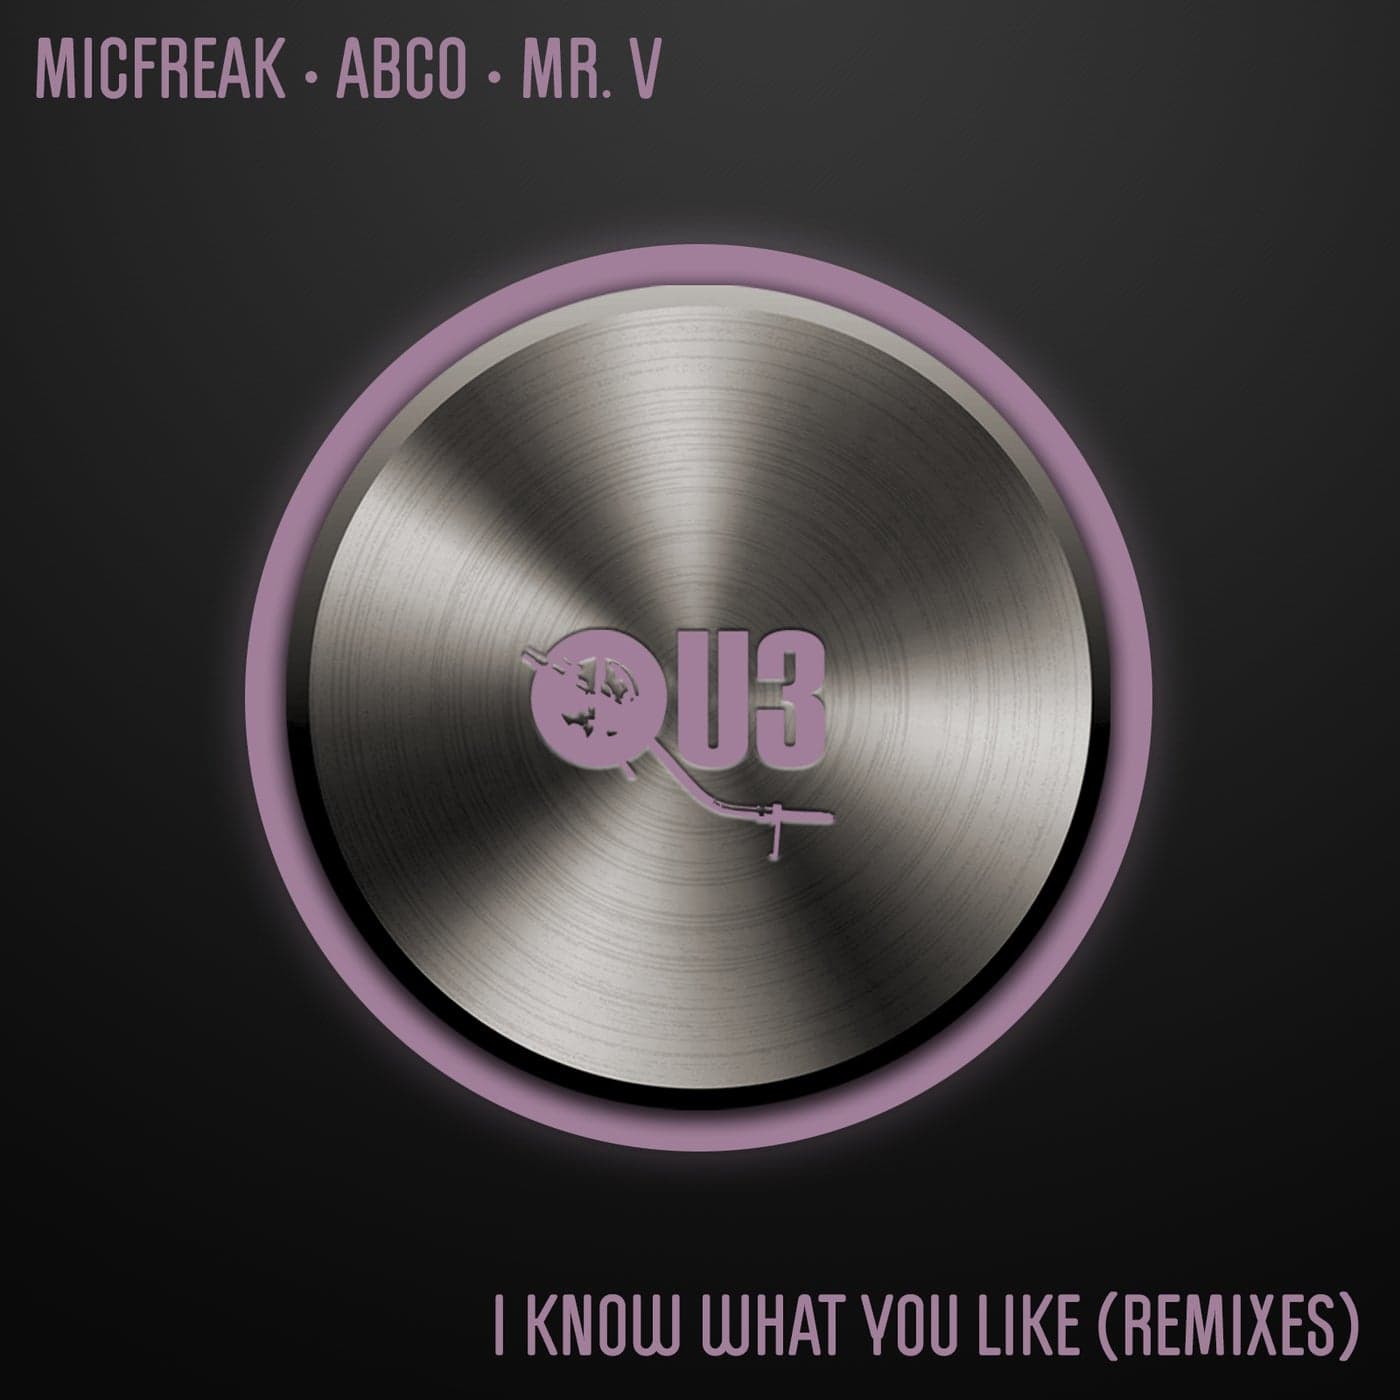 image cover: Mr. V, MicFreak, Abco - I Know What You Like (Remixes) / QU3009